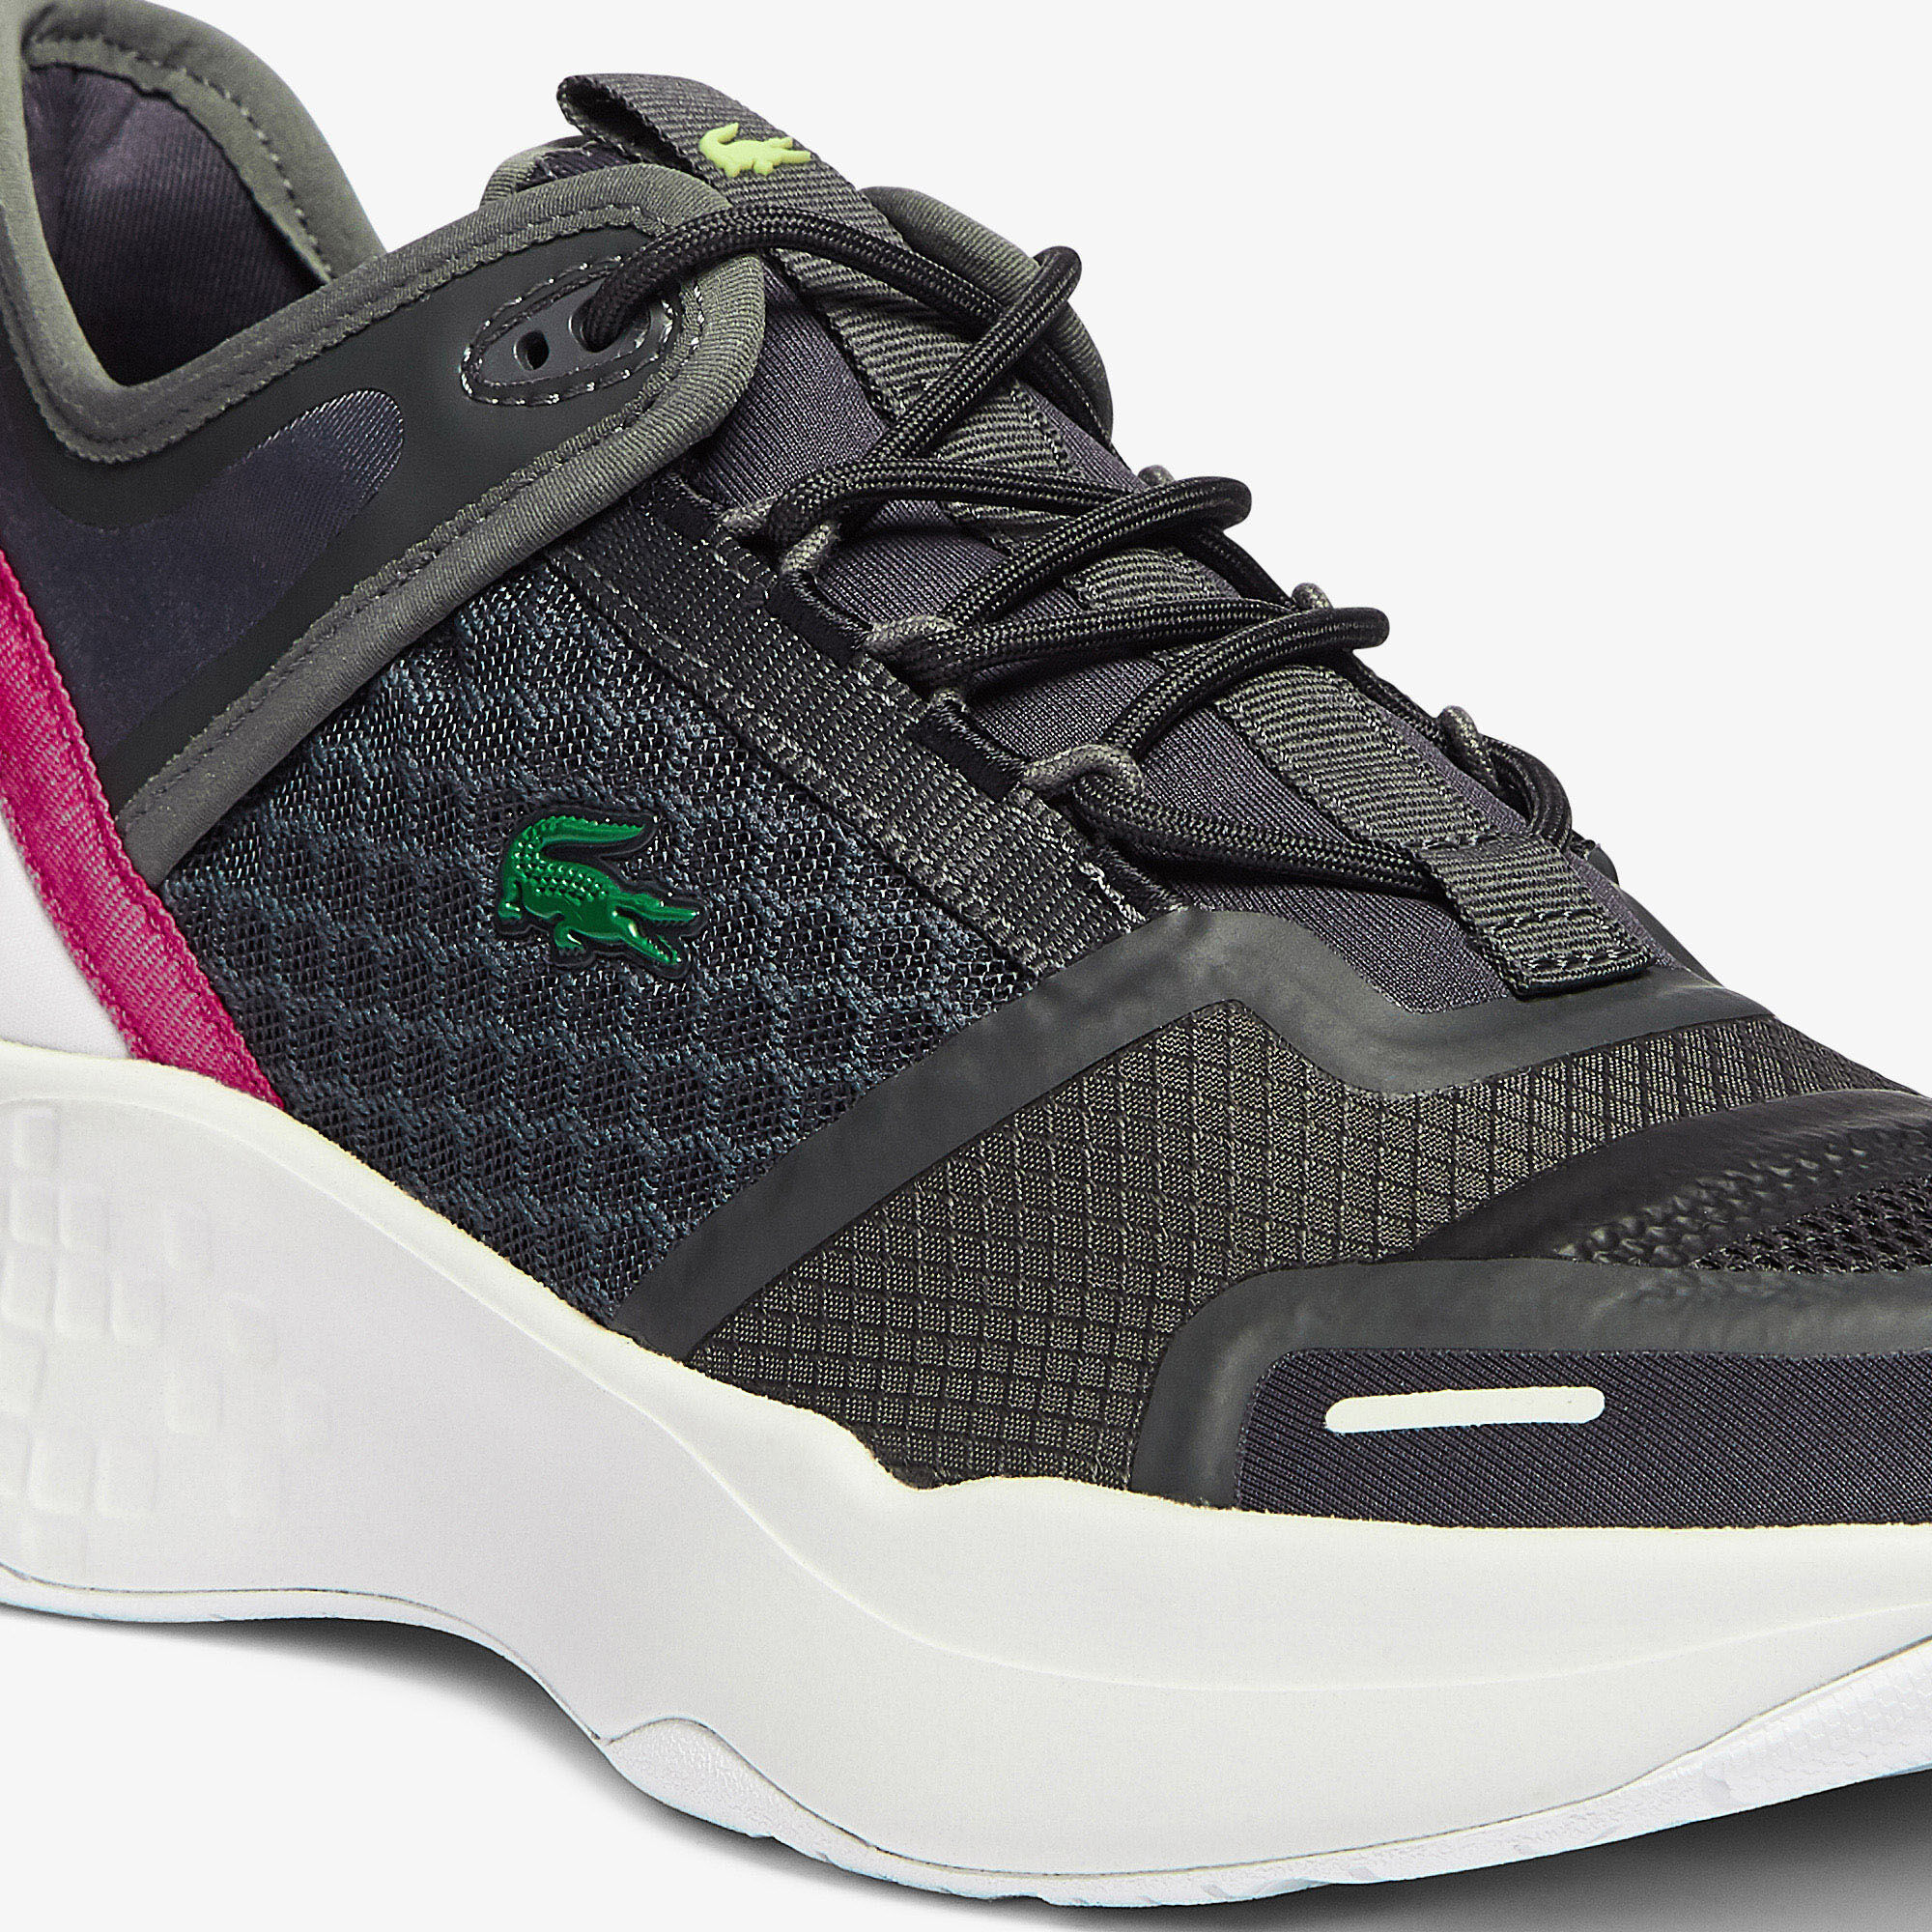 Women's Court-Drive Vantage Textile and TPU Trainers